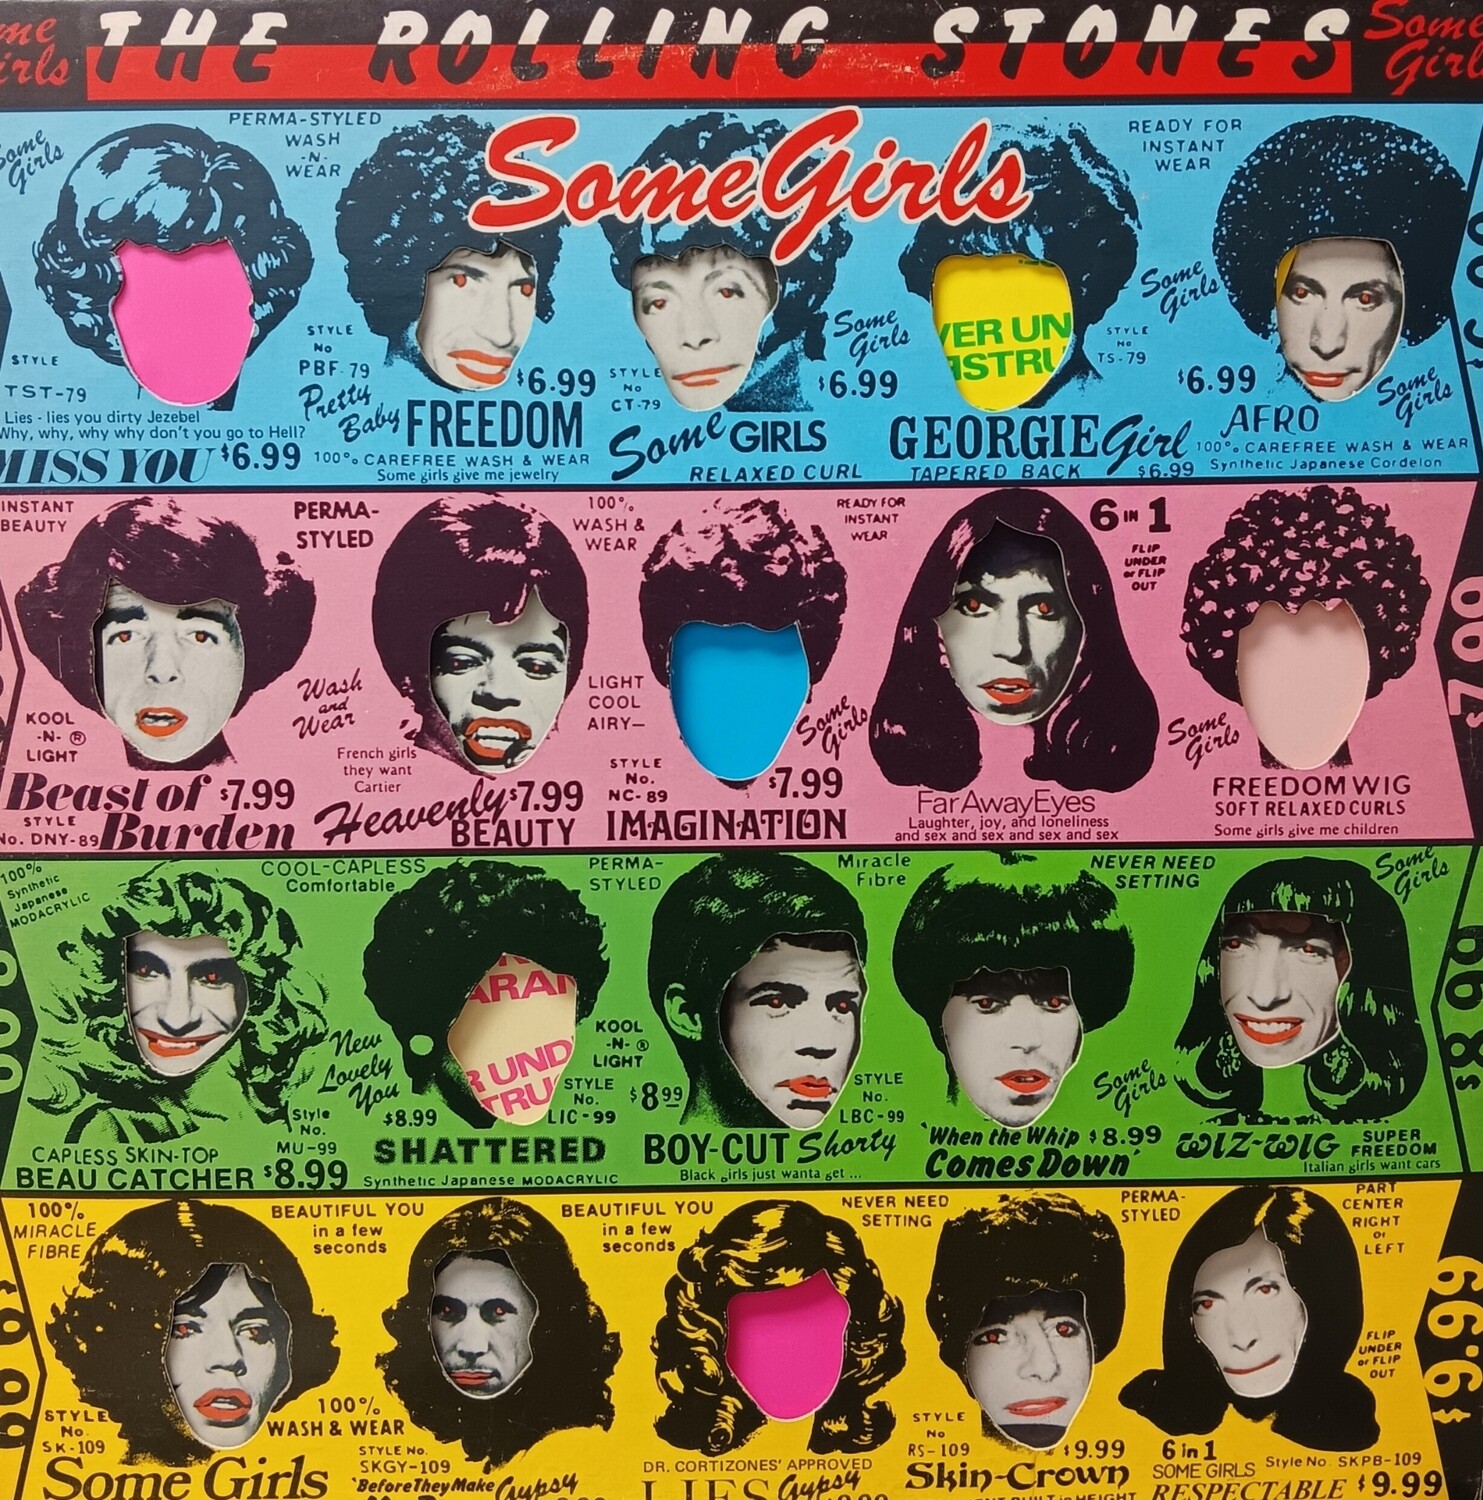 THE ROLLING STONES - Some Girls